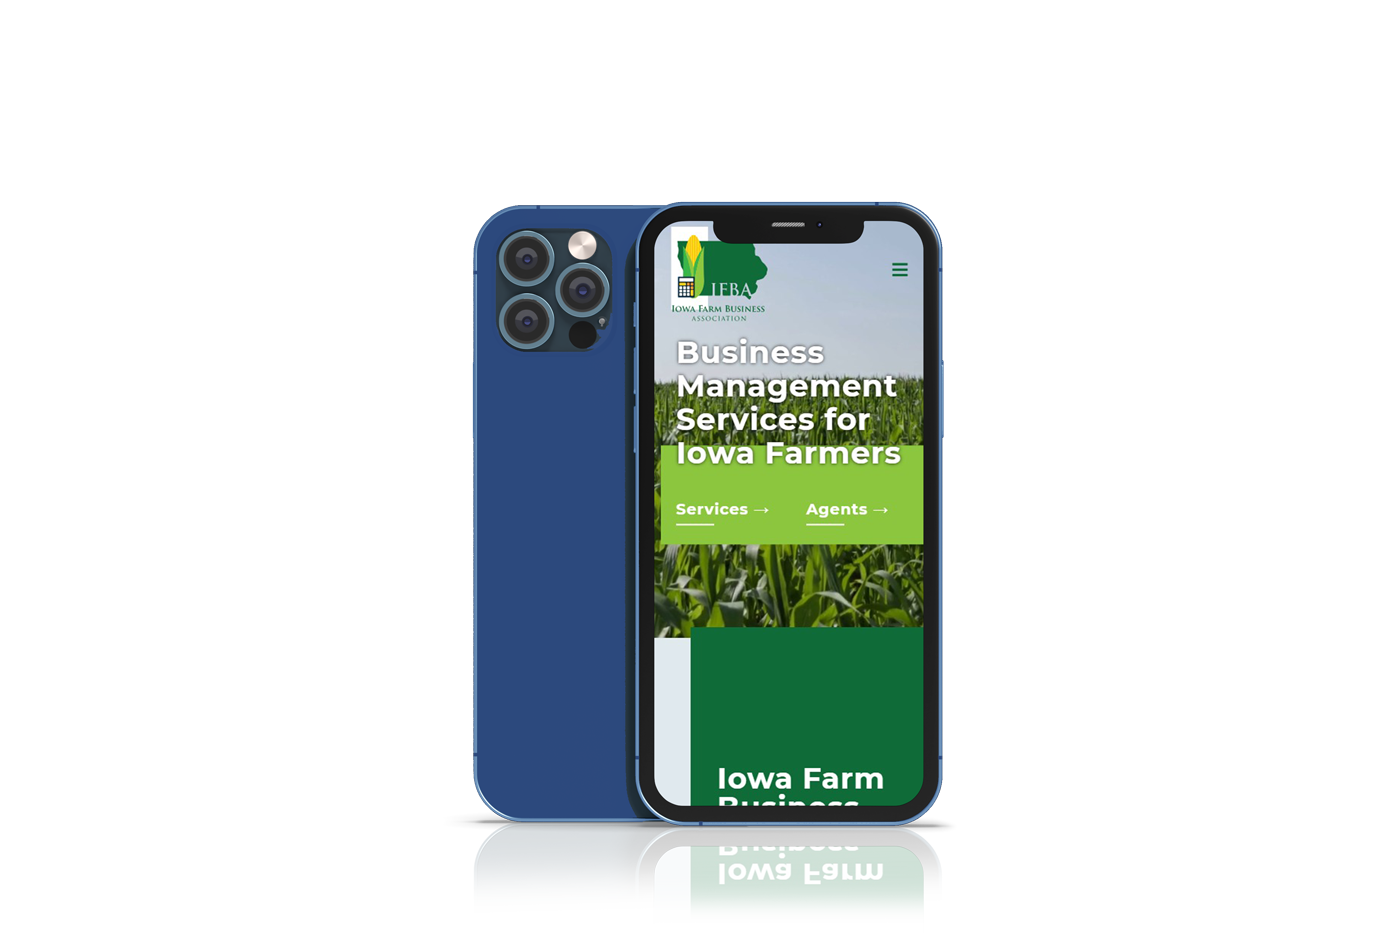 Mockup of the mobile view of the Iowa Farm Business Association website